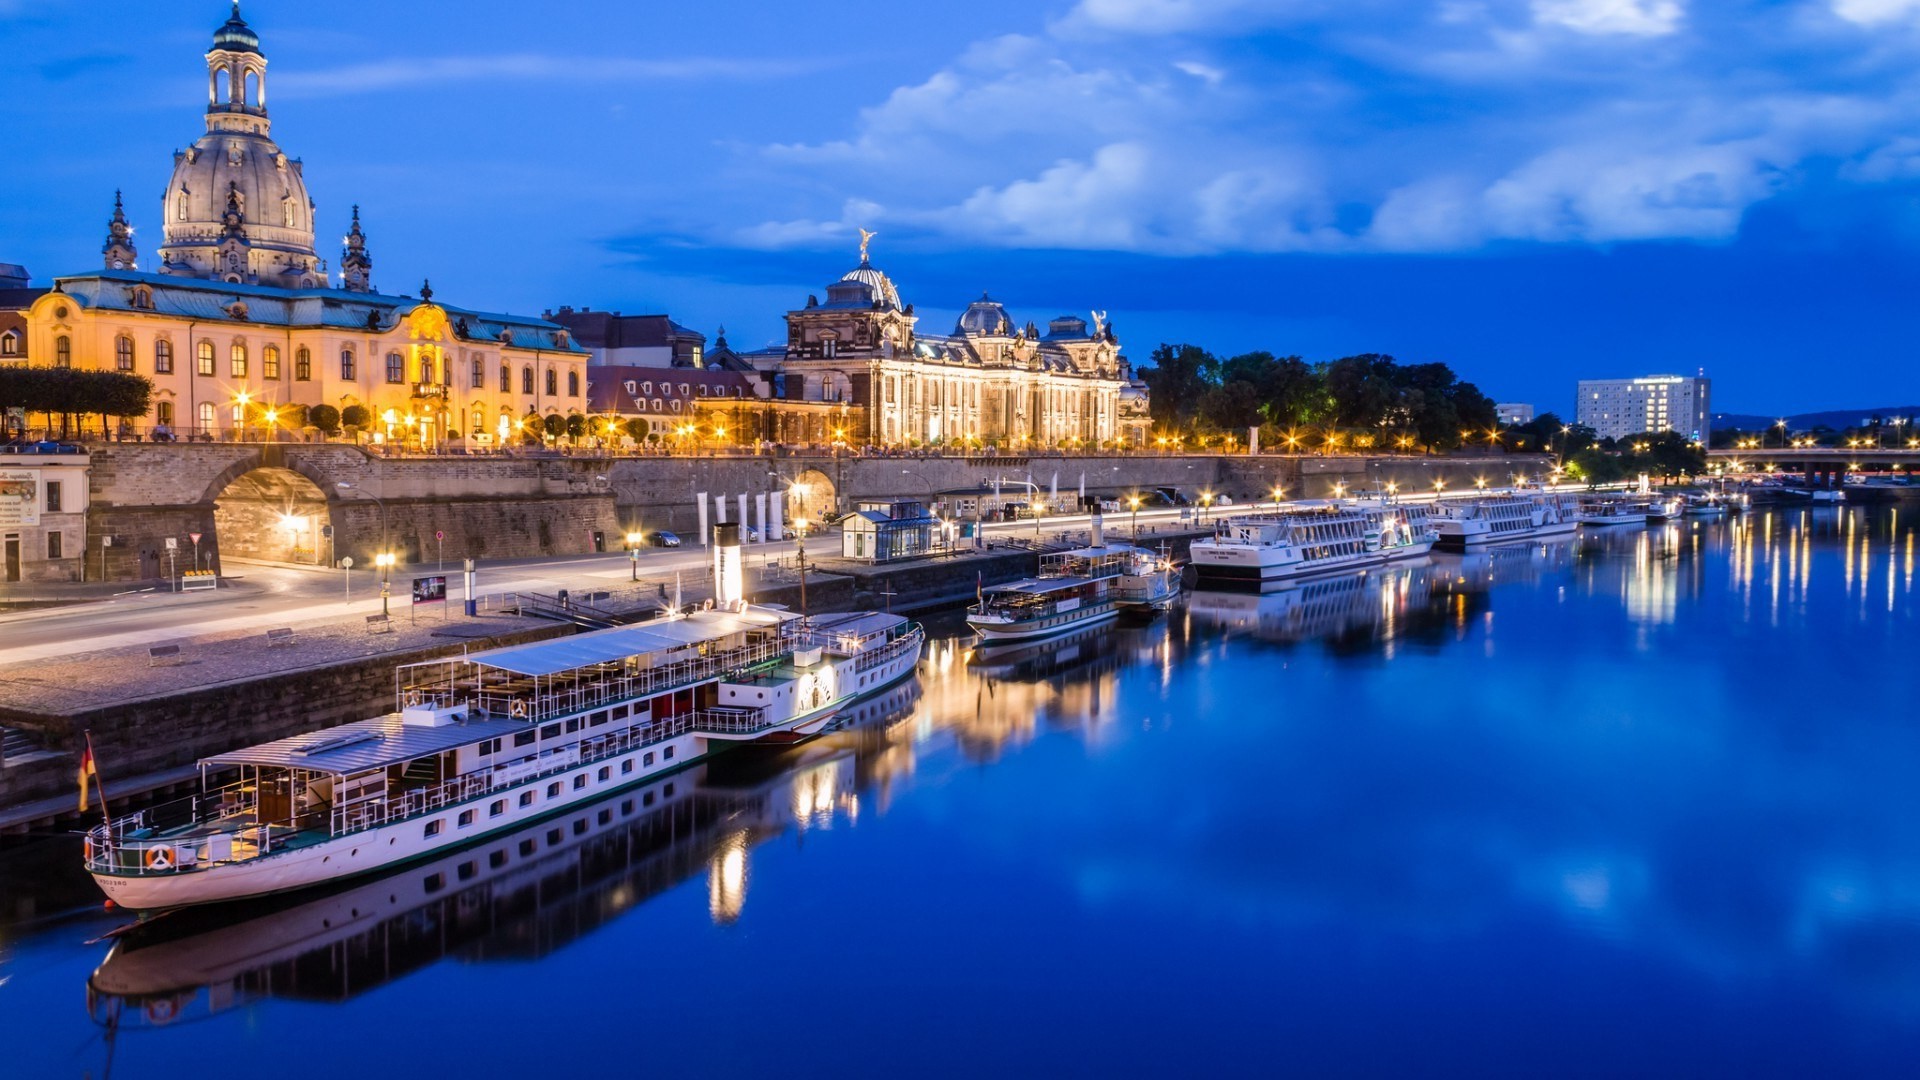 architecture, Building, Evening, Lights, City, Cityscape, Clouds, Dresden, Germany, River, Ship, Boats, Cruise Ship, Cathedral, Old Building, Reflection, Tunnel, Bridge, Trees, House, Canaletto Wallpaper